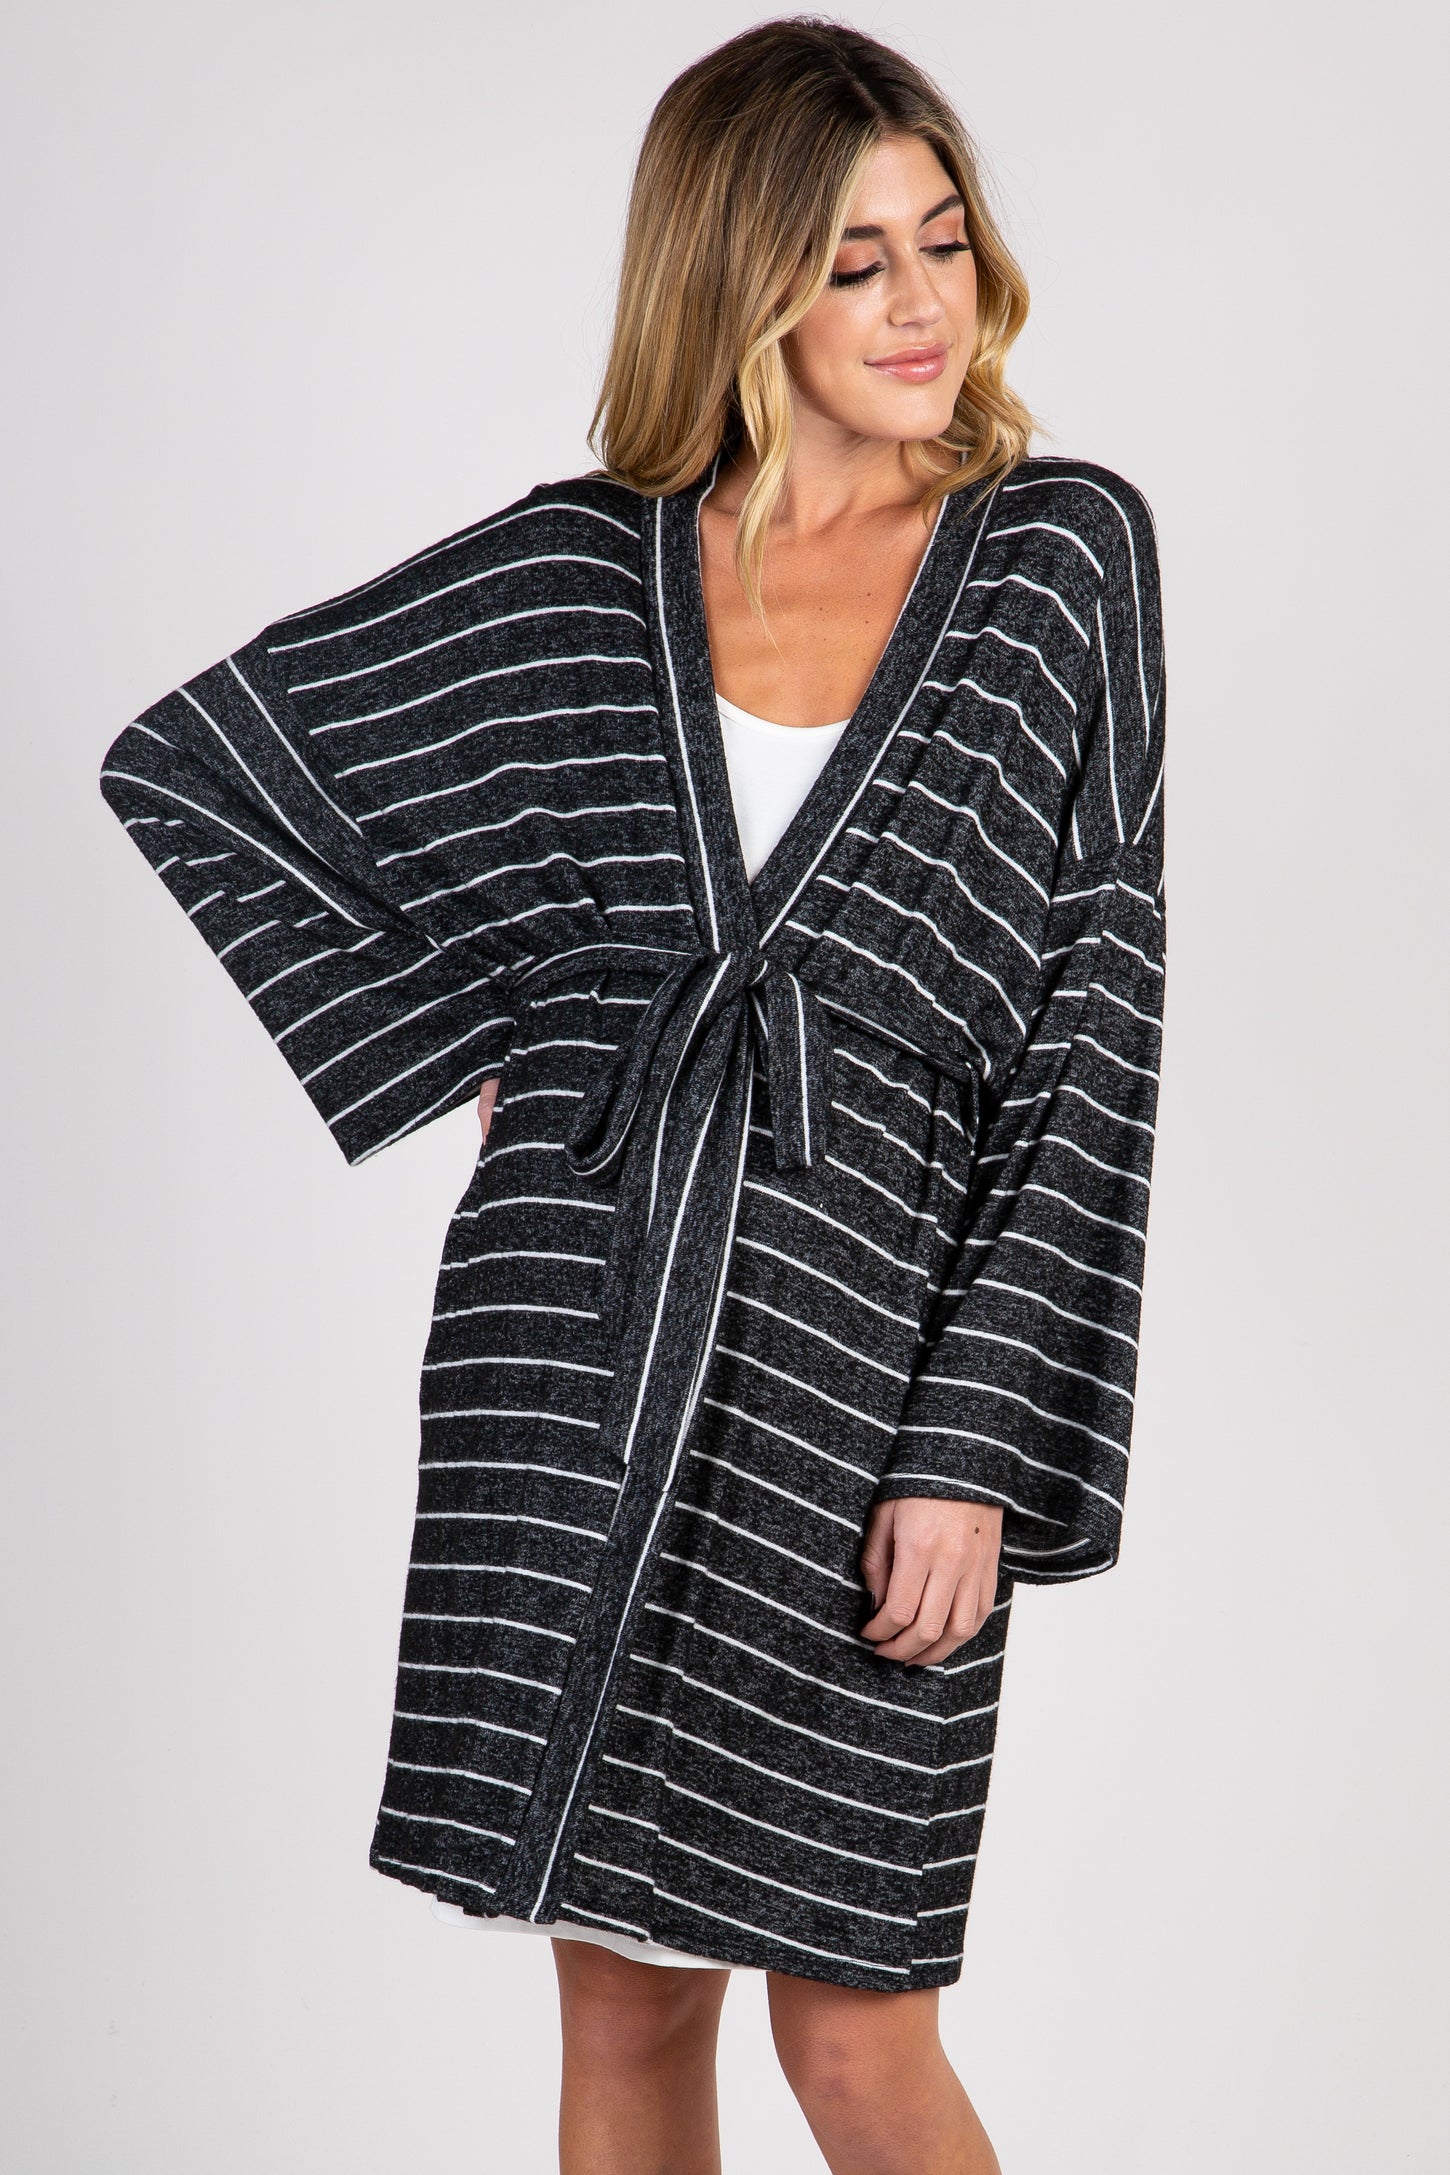 PinkBlush Charcoal Heather Striped Delivery/ Nursing Maternity Robe